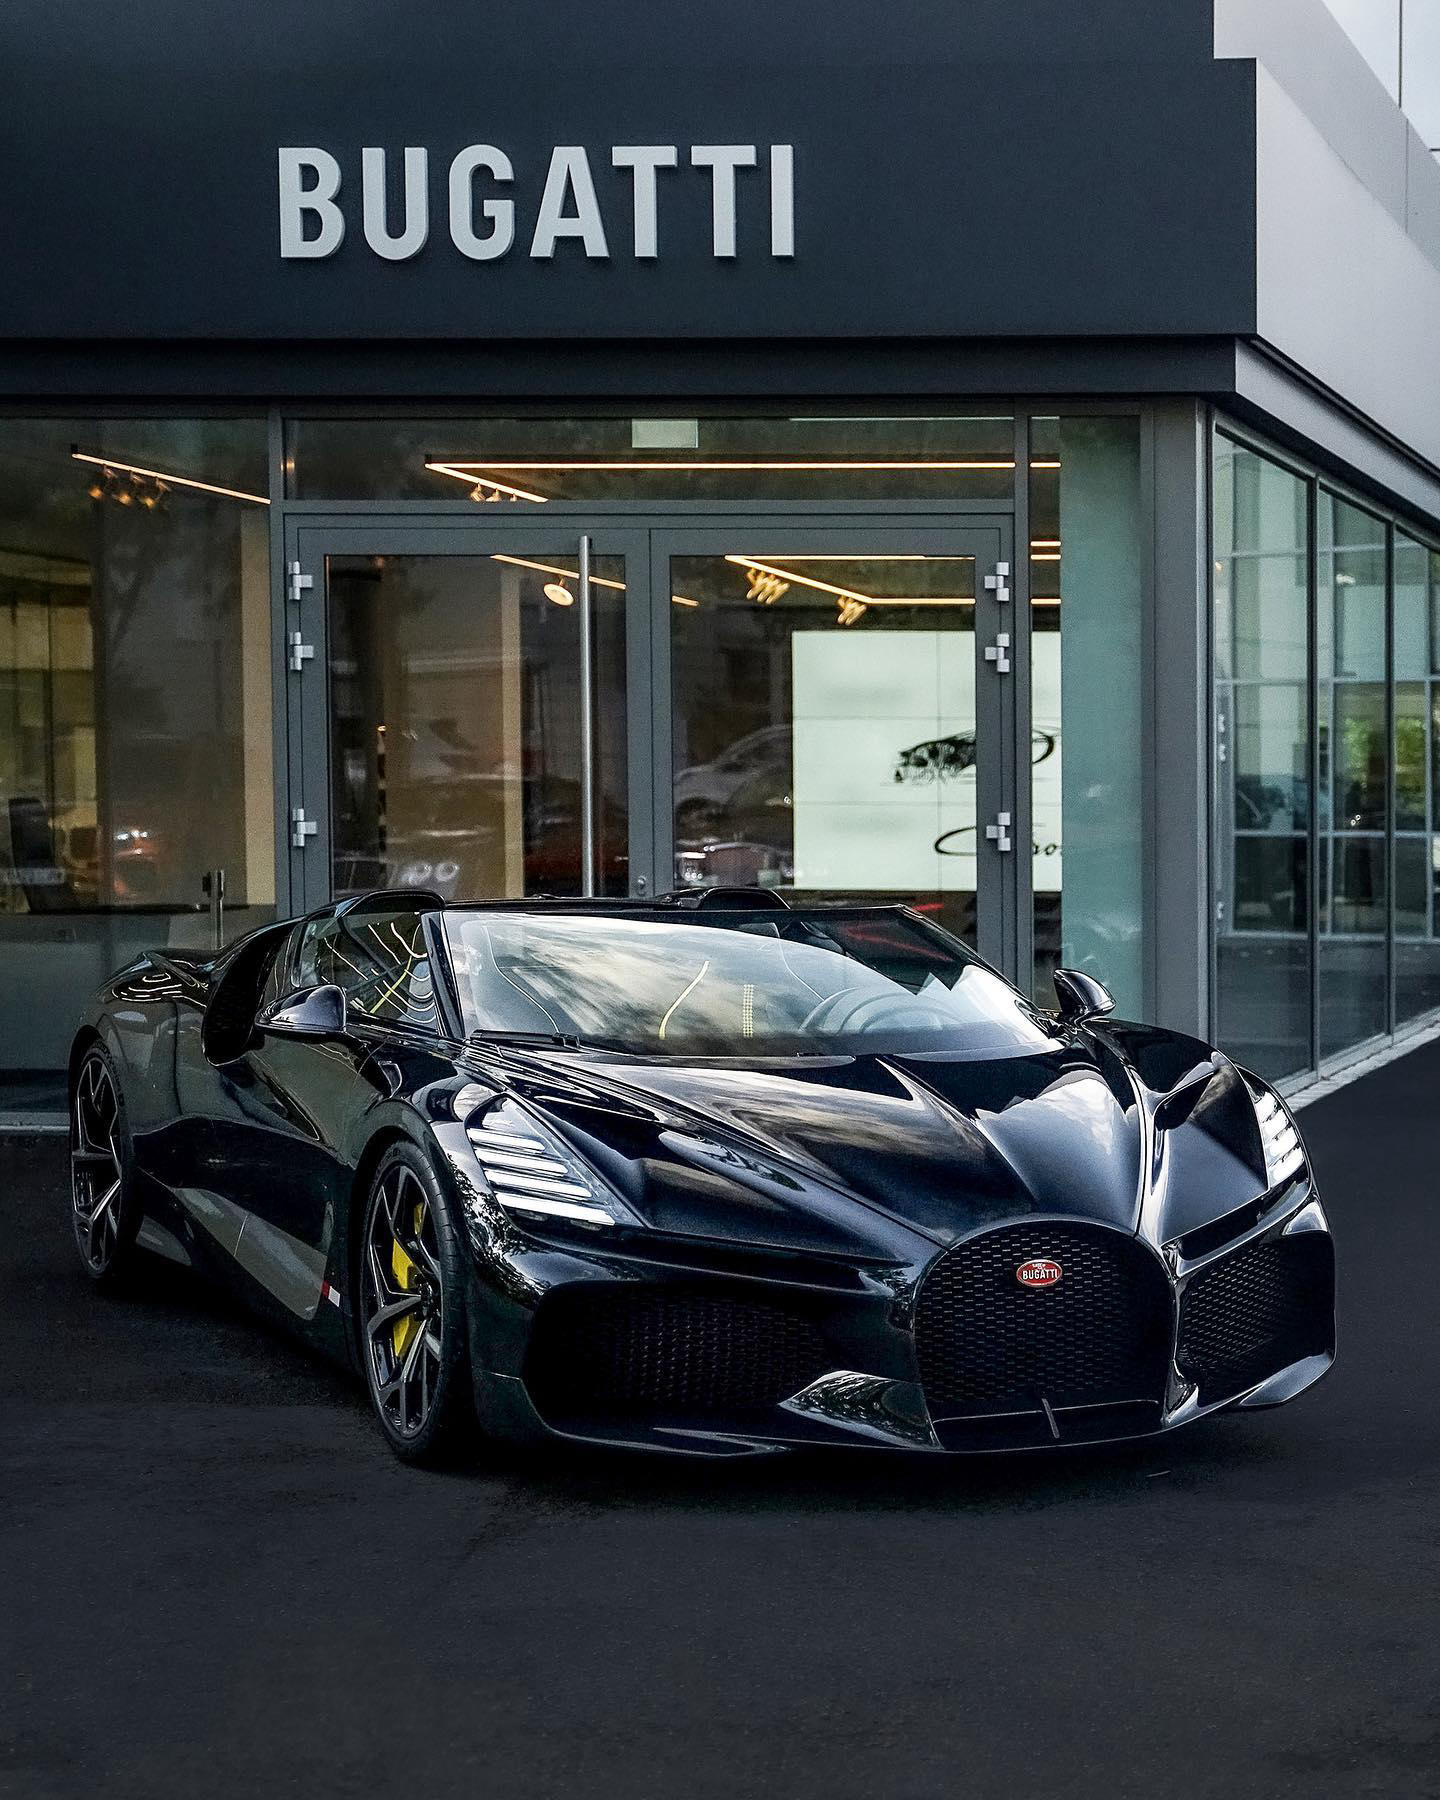 BUGATTI - Each stage of the BUGATTI ownership experience is meticulously curated